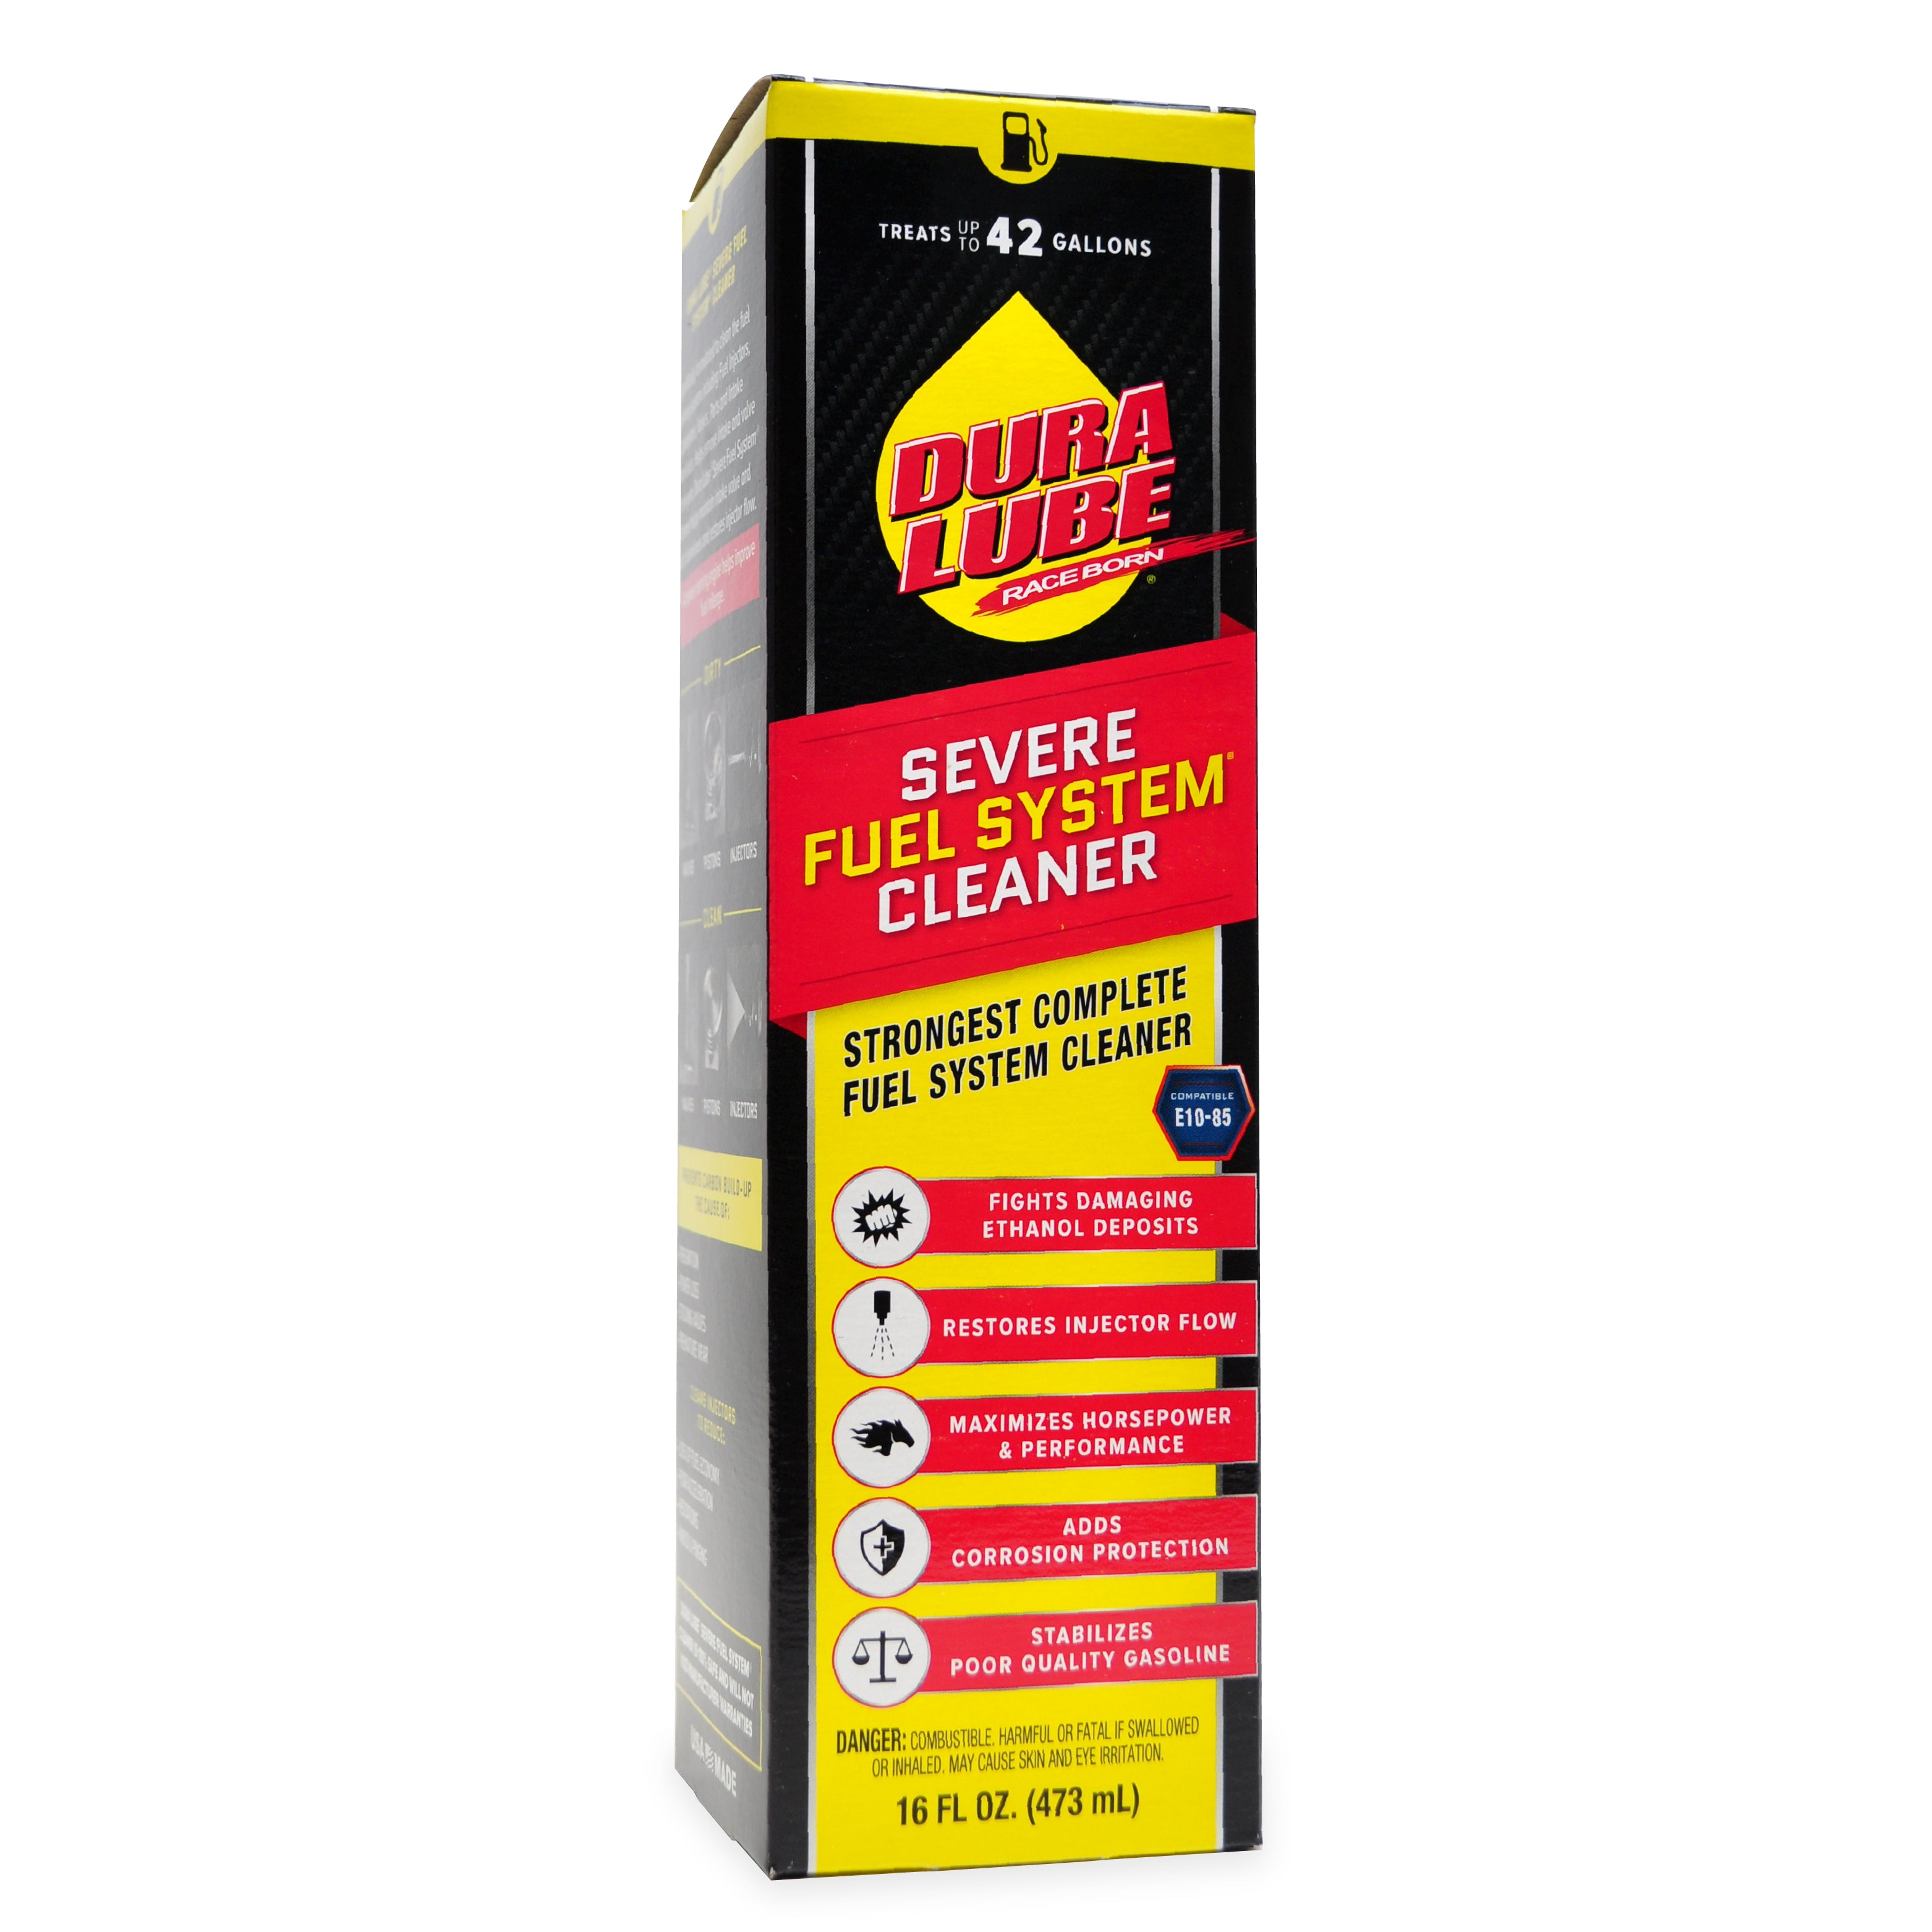 Dura Lube Severe Catalytic & Exhaust Treatment -16 oz . Exhaust System